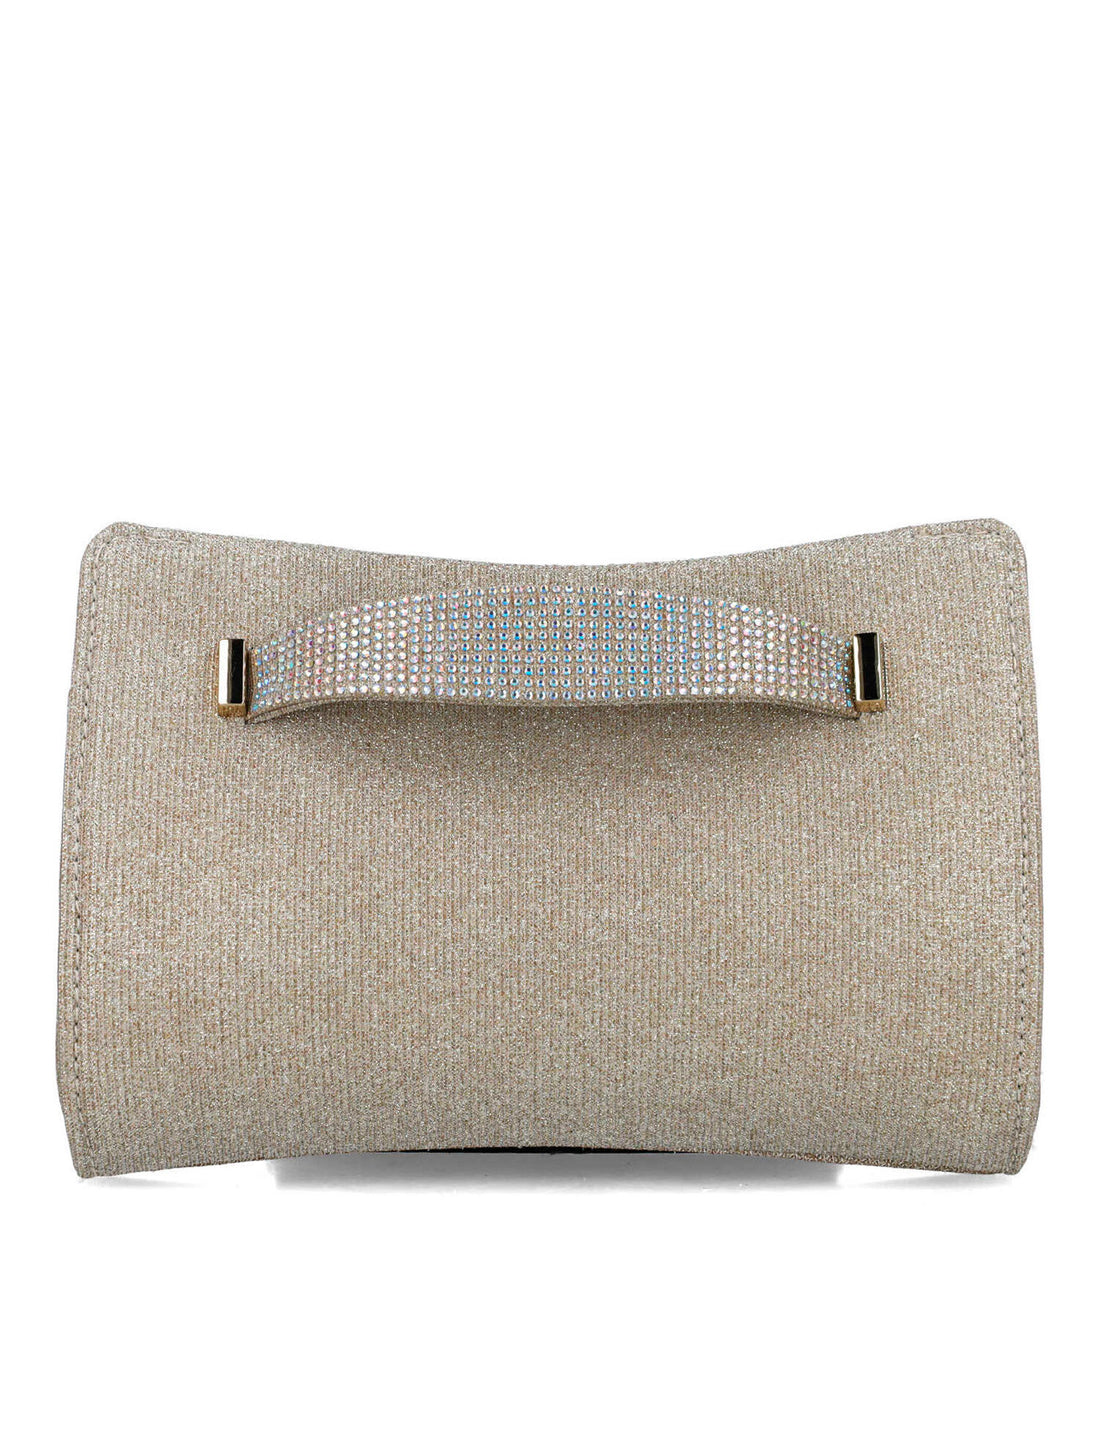 Gold Clutch With Hand Strap_85510_00_01